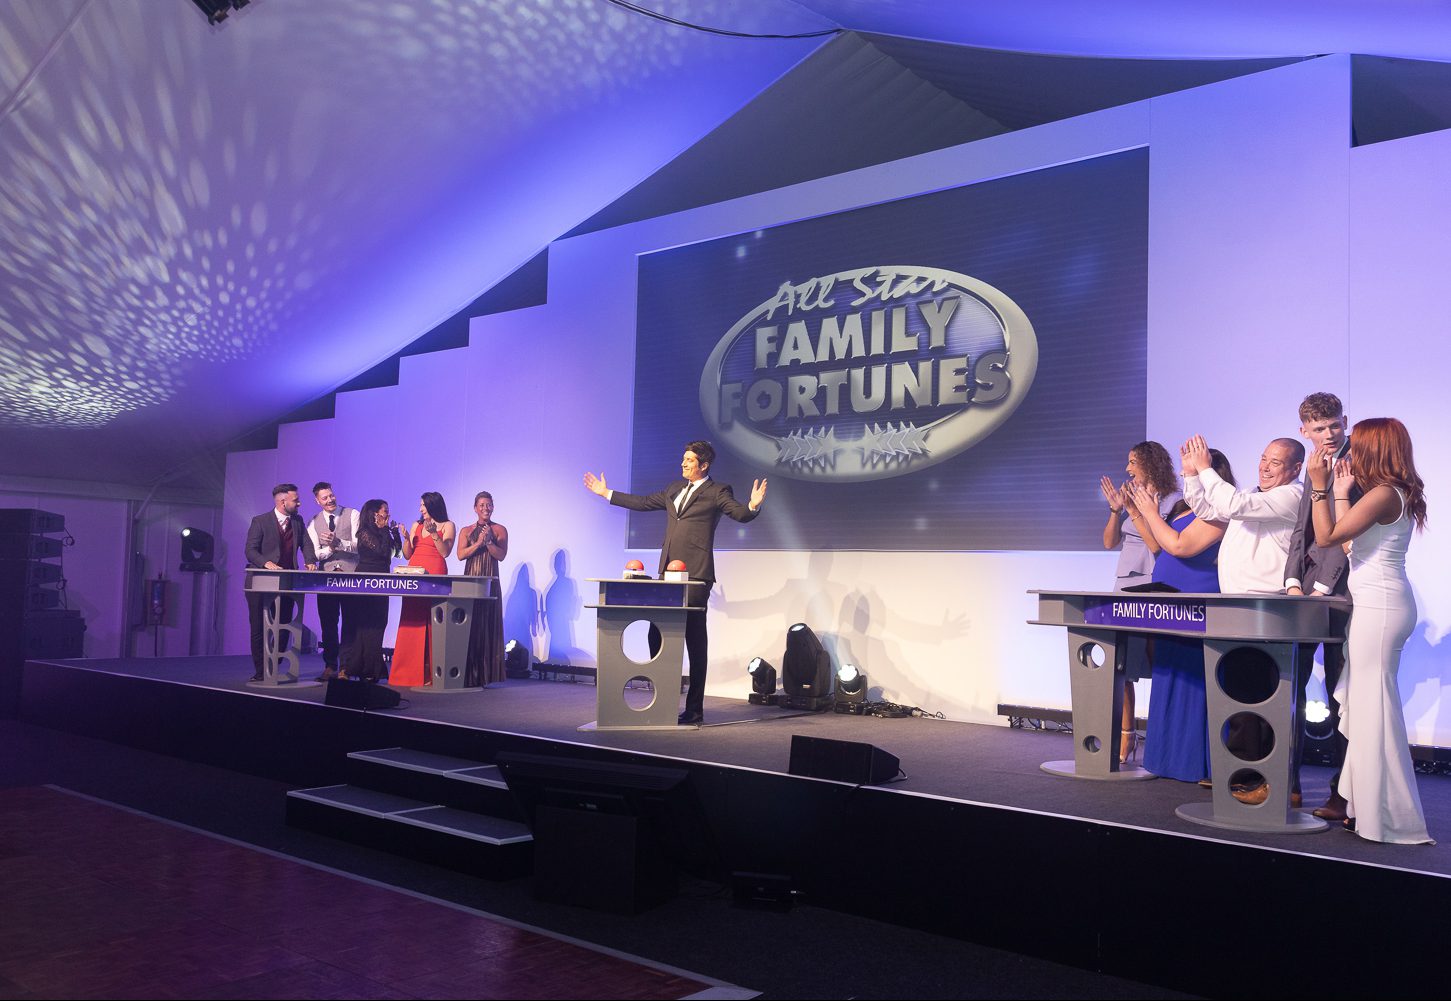 CCS family fortunes